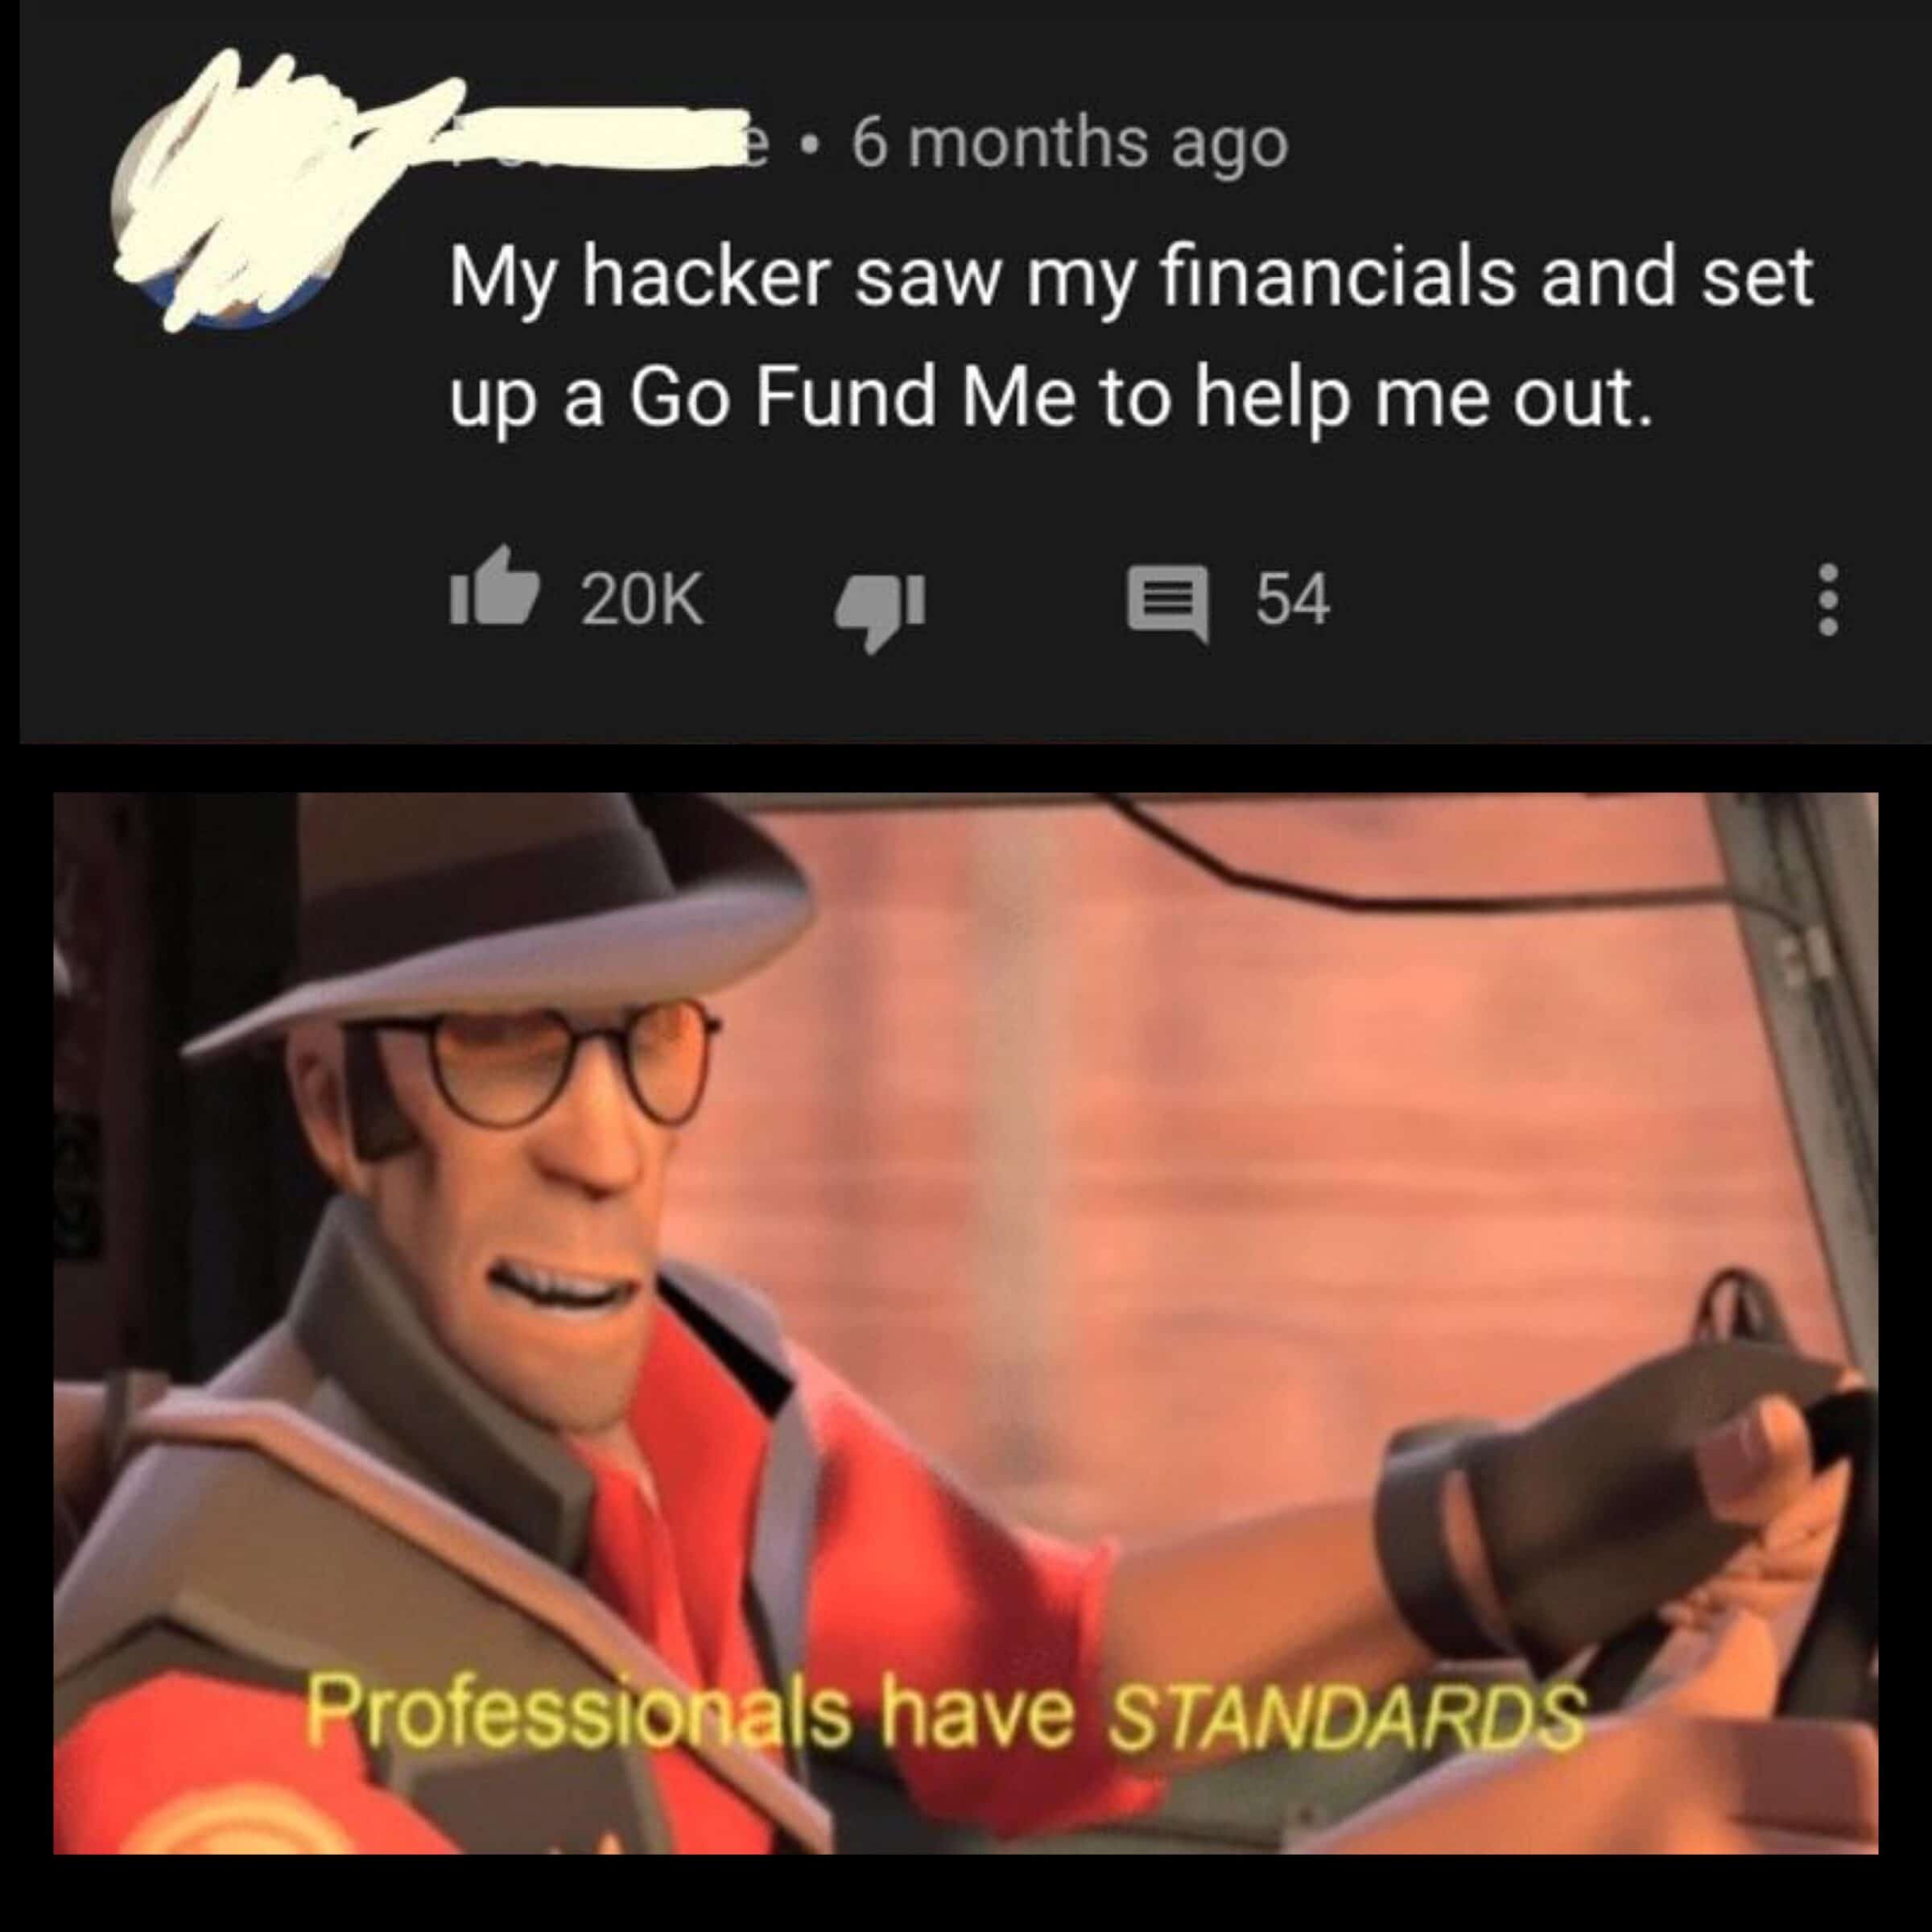 Wholesome memes, TF2, Be Wholesome Memes Wholesome memes, TF2, Be text: • 6 months ago My hacker saw my financials and set up a Go Fund Me to help me out. 16 20K 91 54 Professionals have STANDARDæ 